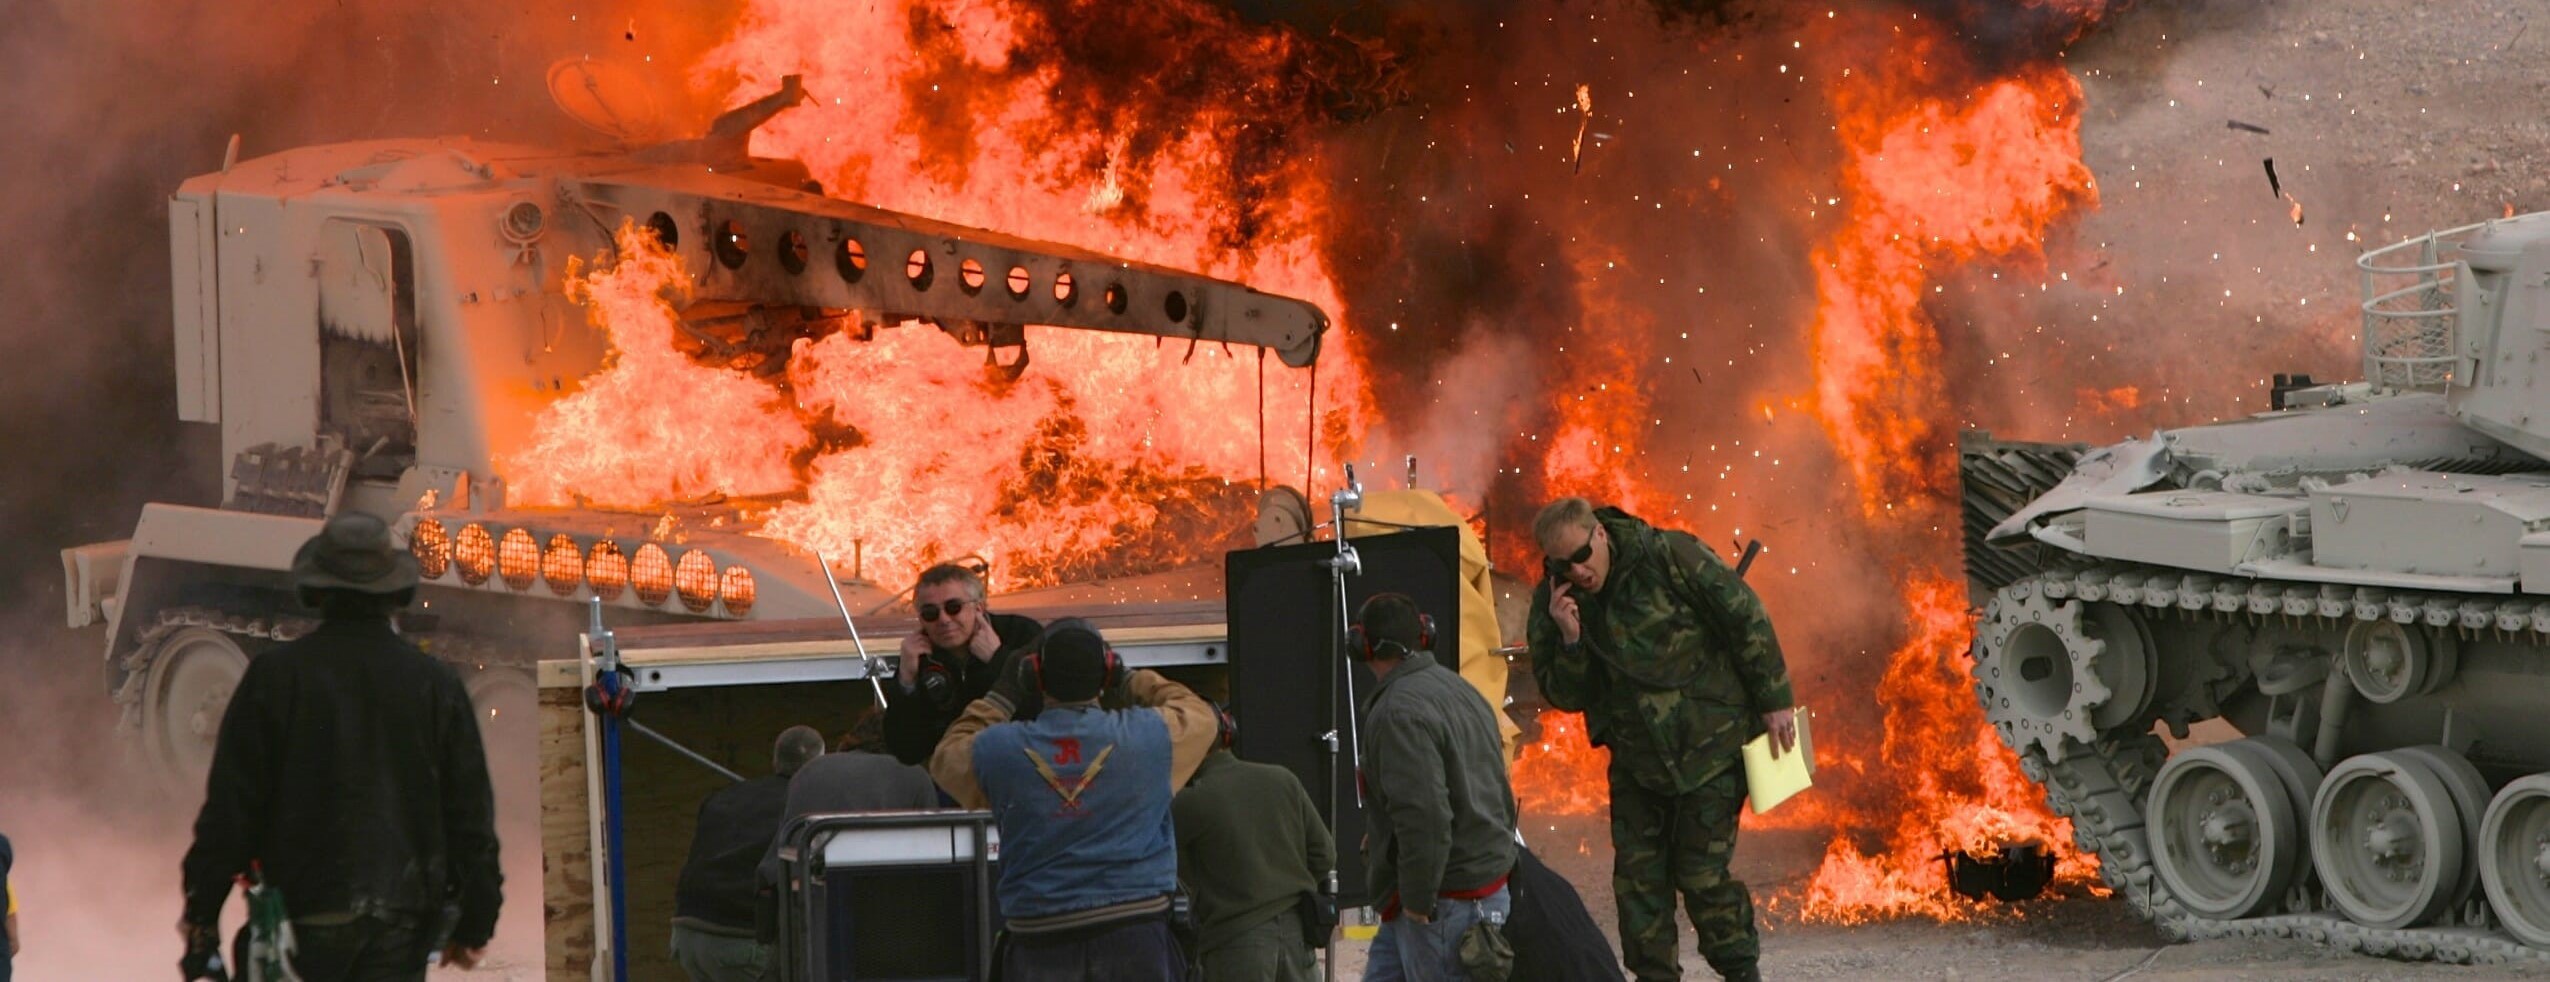 Tanks explode during filming of the movie Fighter Pilot